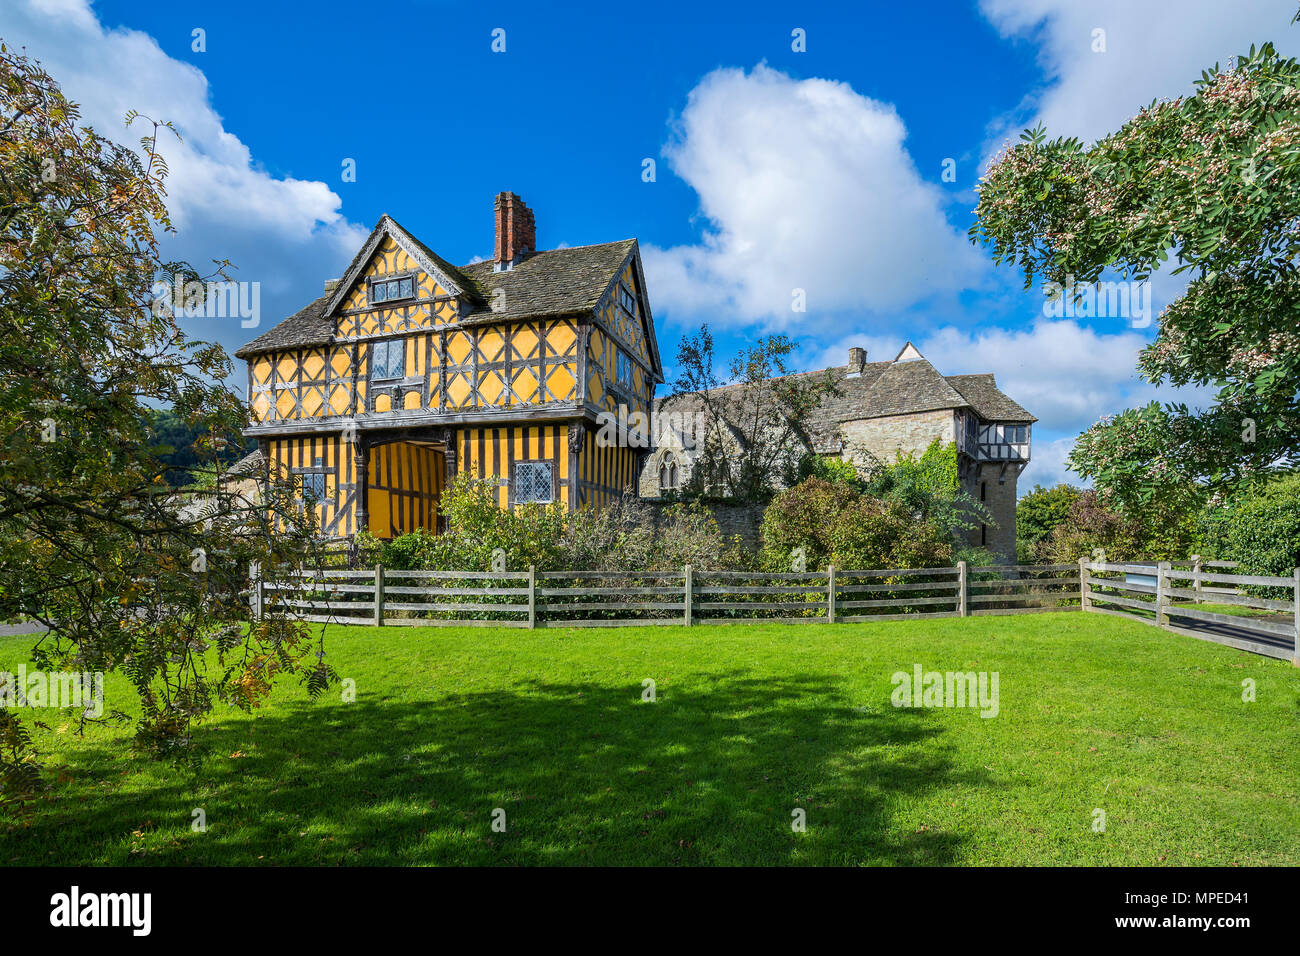 Stokesay Castle a fortified manor house, Stokesay, Shropshire, England, United KIngdom, Europe. Stock Photo